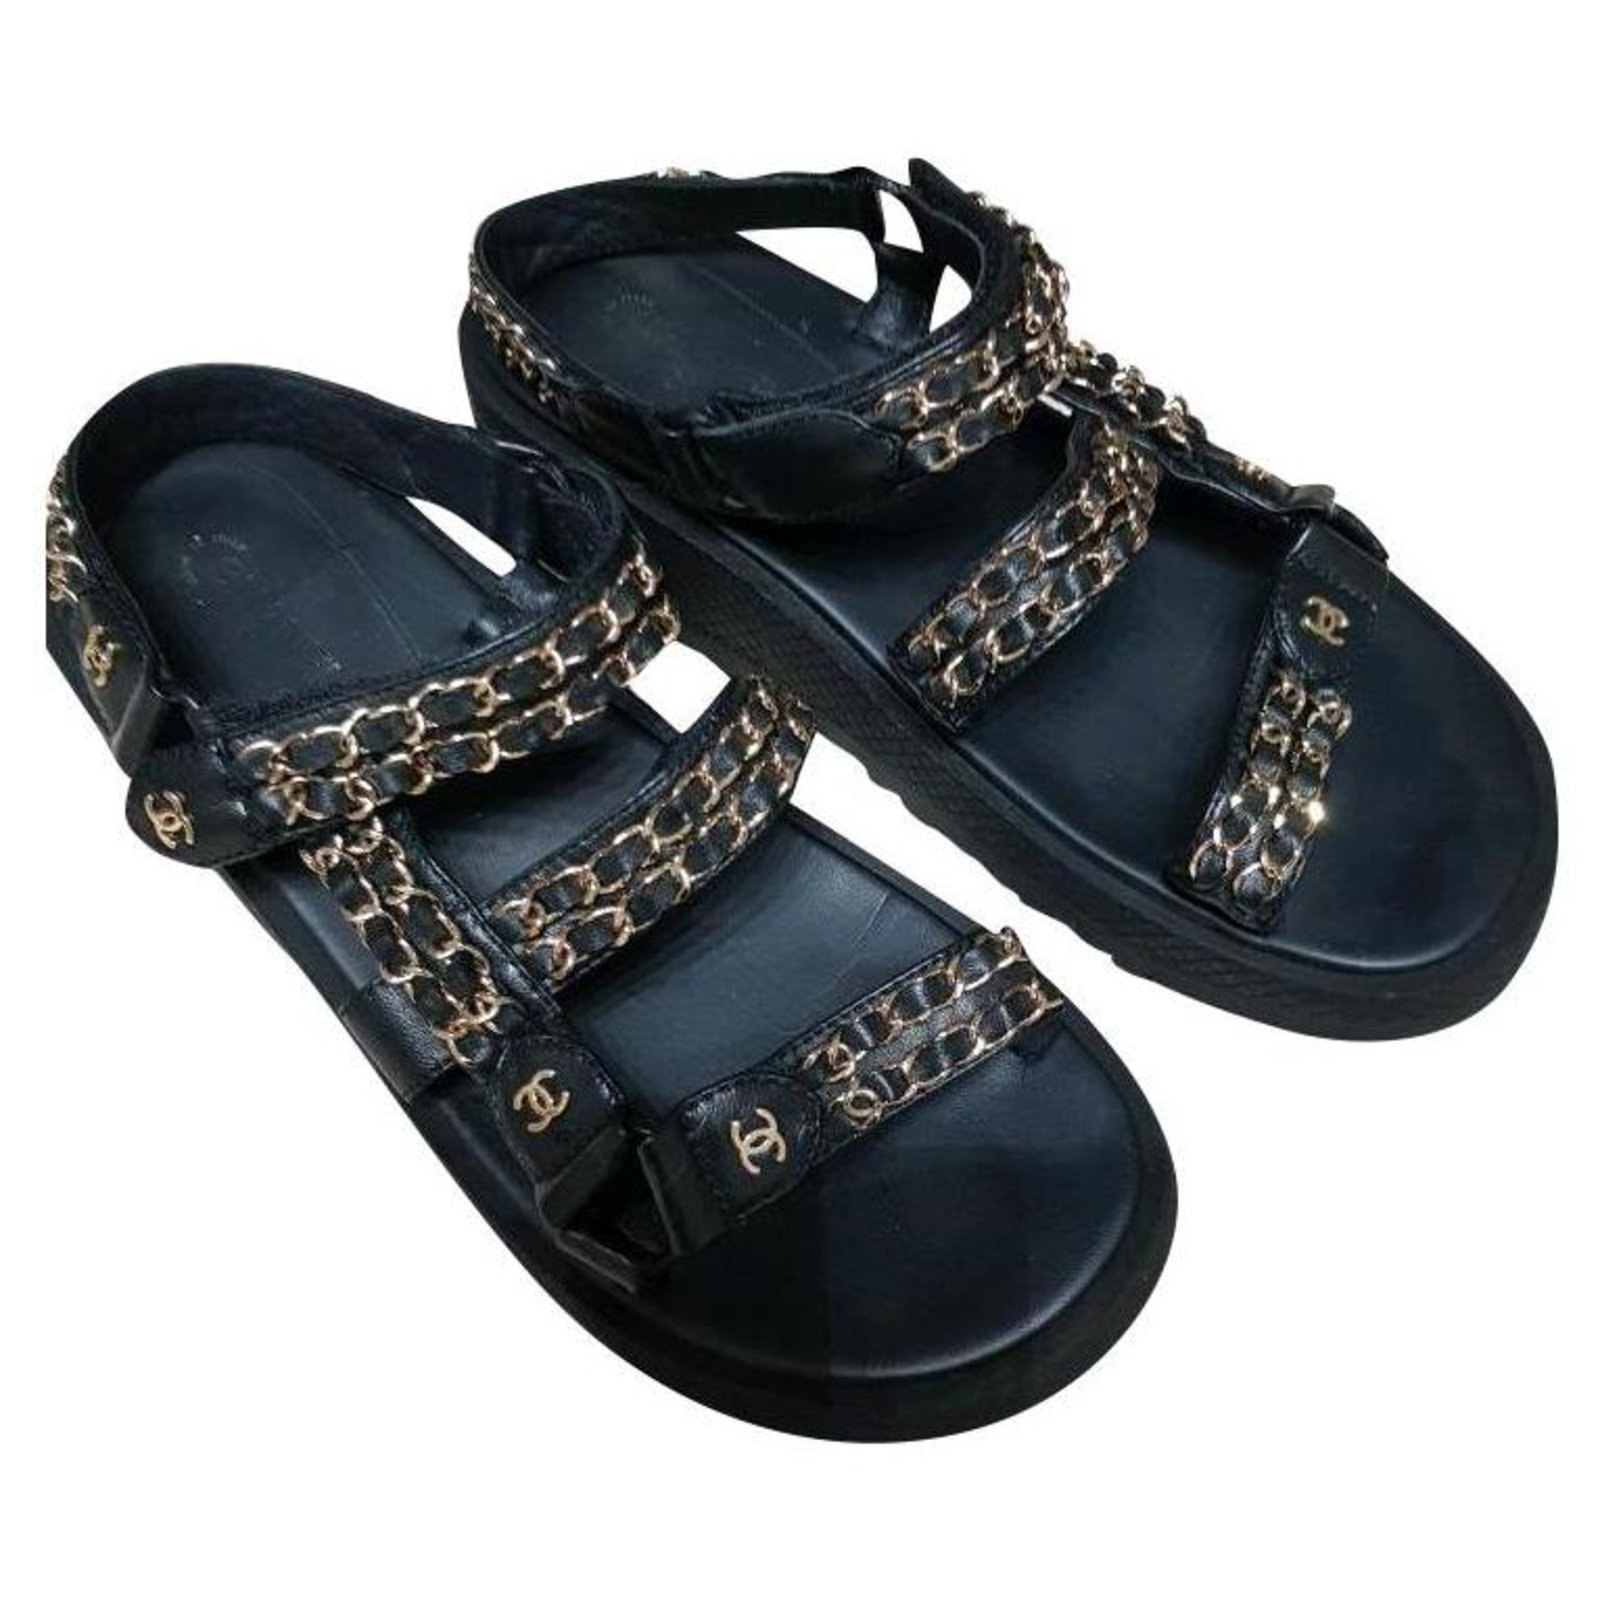 Dad sandals leather sandal Chanel Black size 39 EU in Leather  33605510